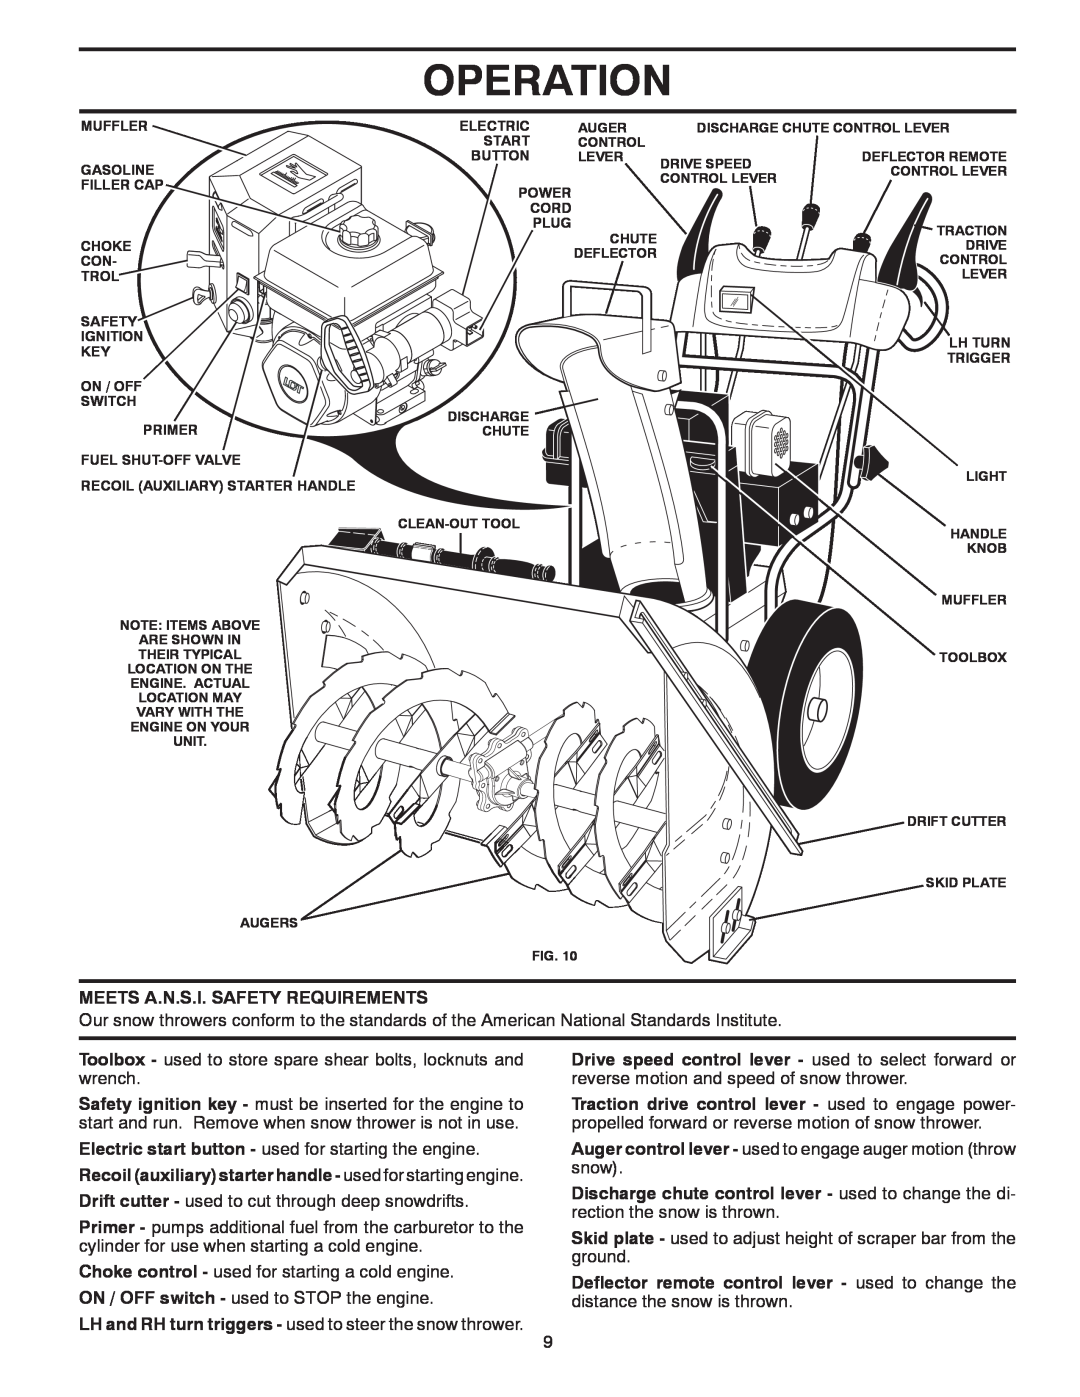 Poulan PP414EPS30 owner manual Operation, Meets A.N.S.I. Safety Requirements 